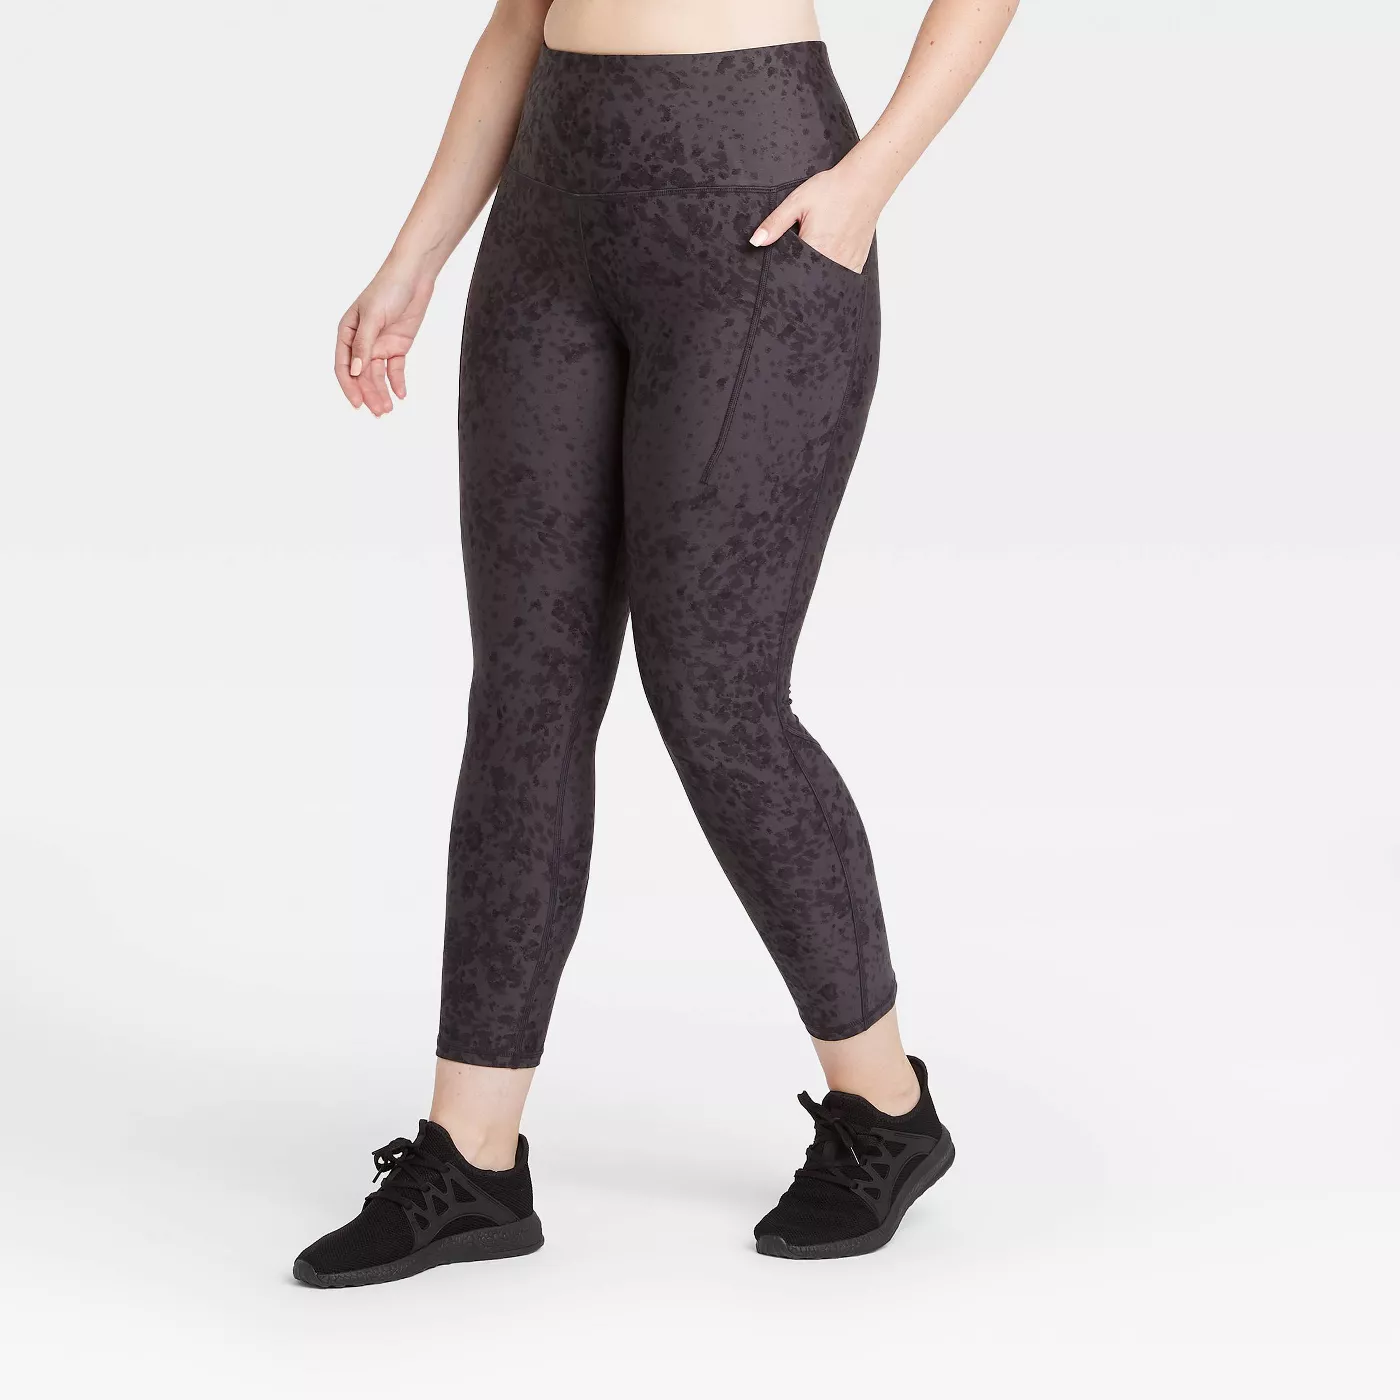 Target's All In Motion Line Is Inclusive, Quality Activewear For